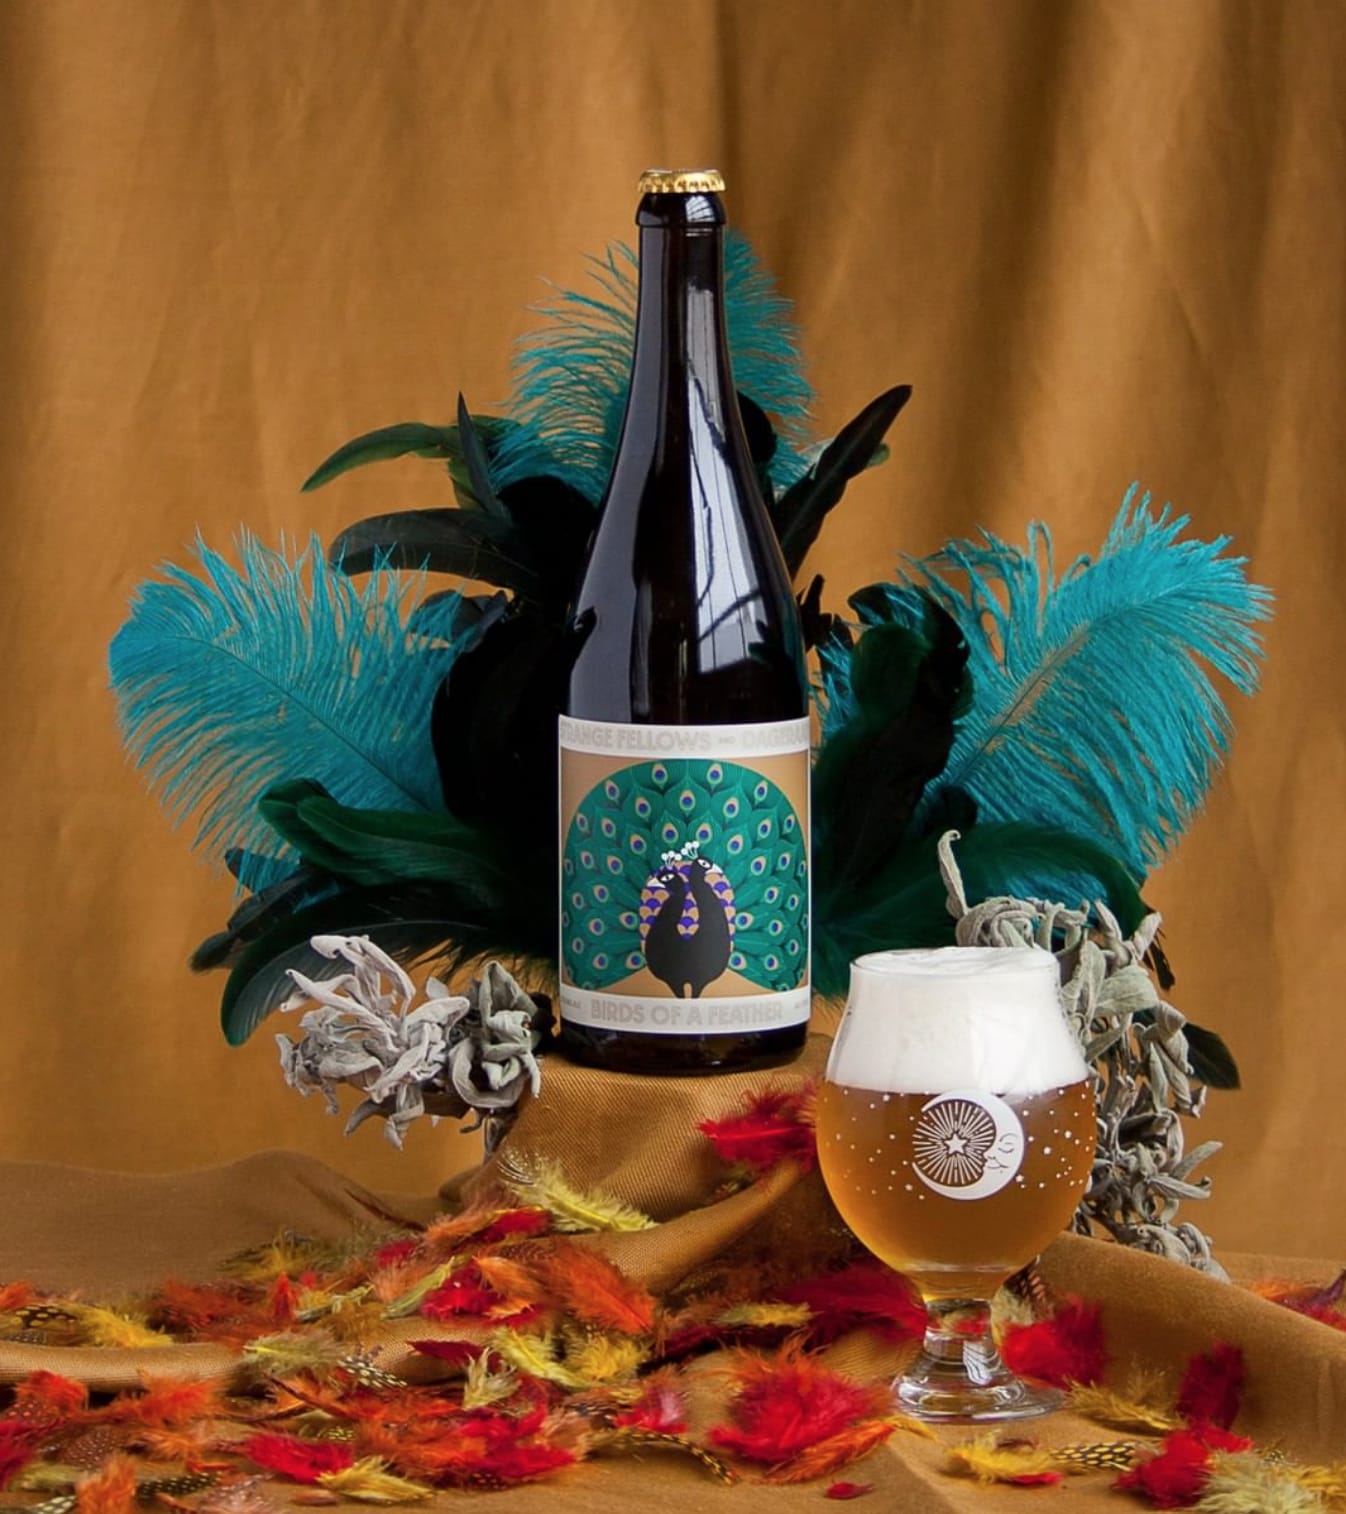 Birds of a Feather by Dageraad Brewing (collab w/ Strange Fellows Brewing)